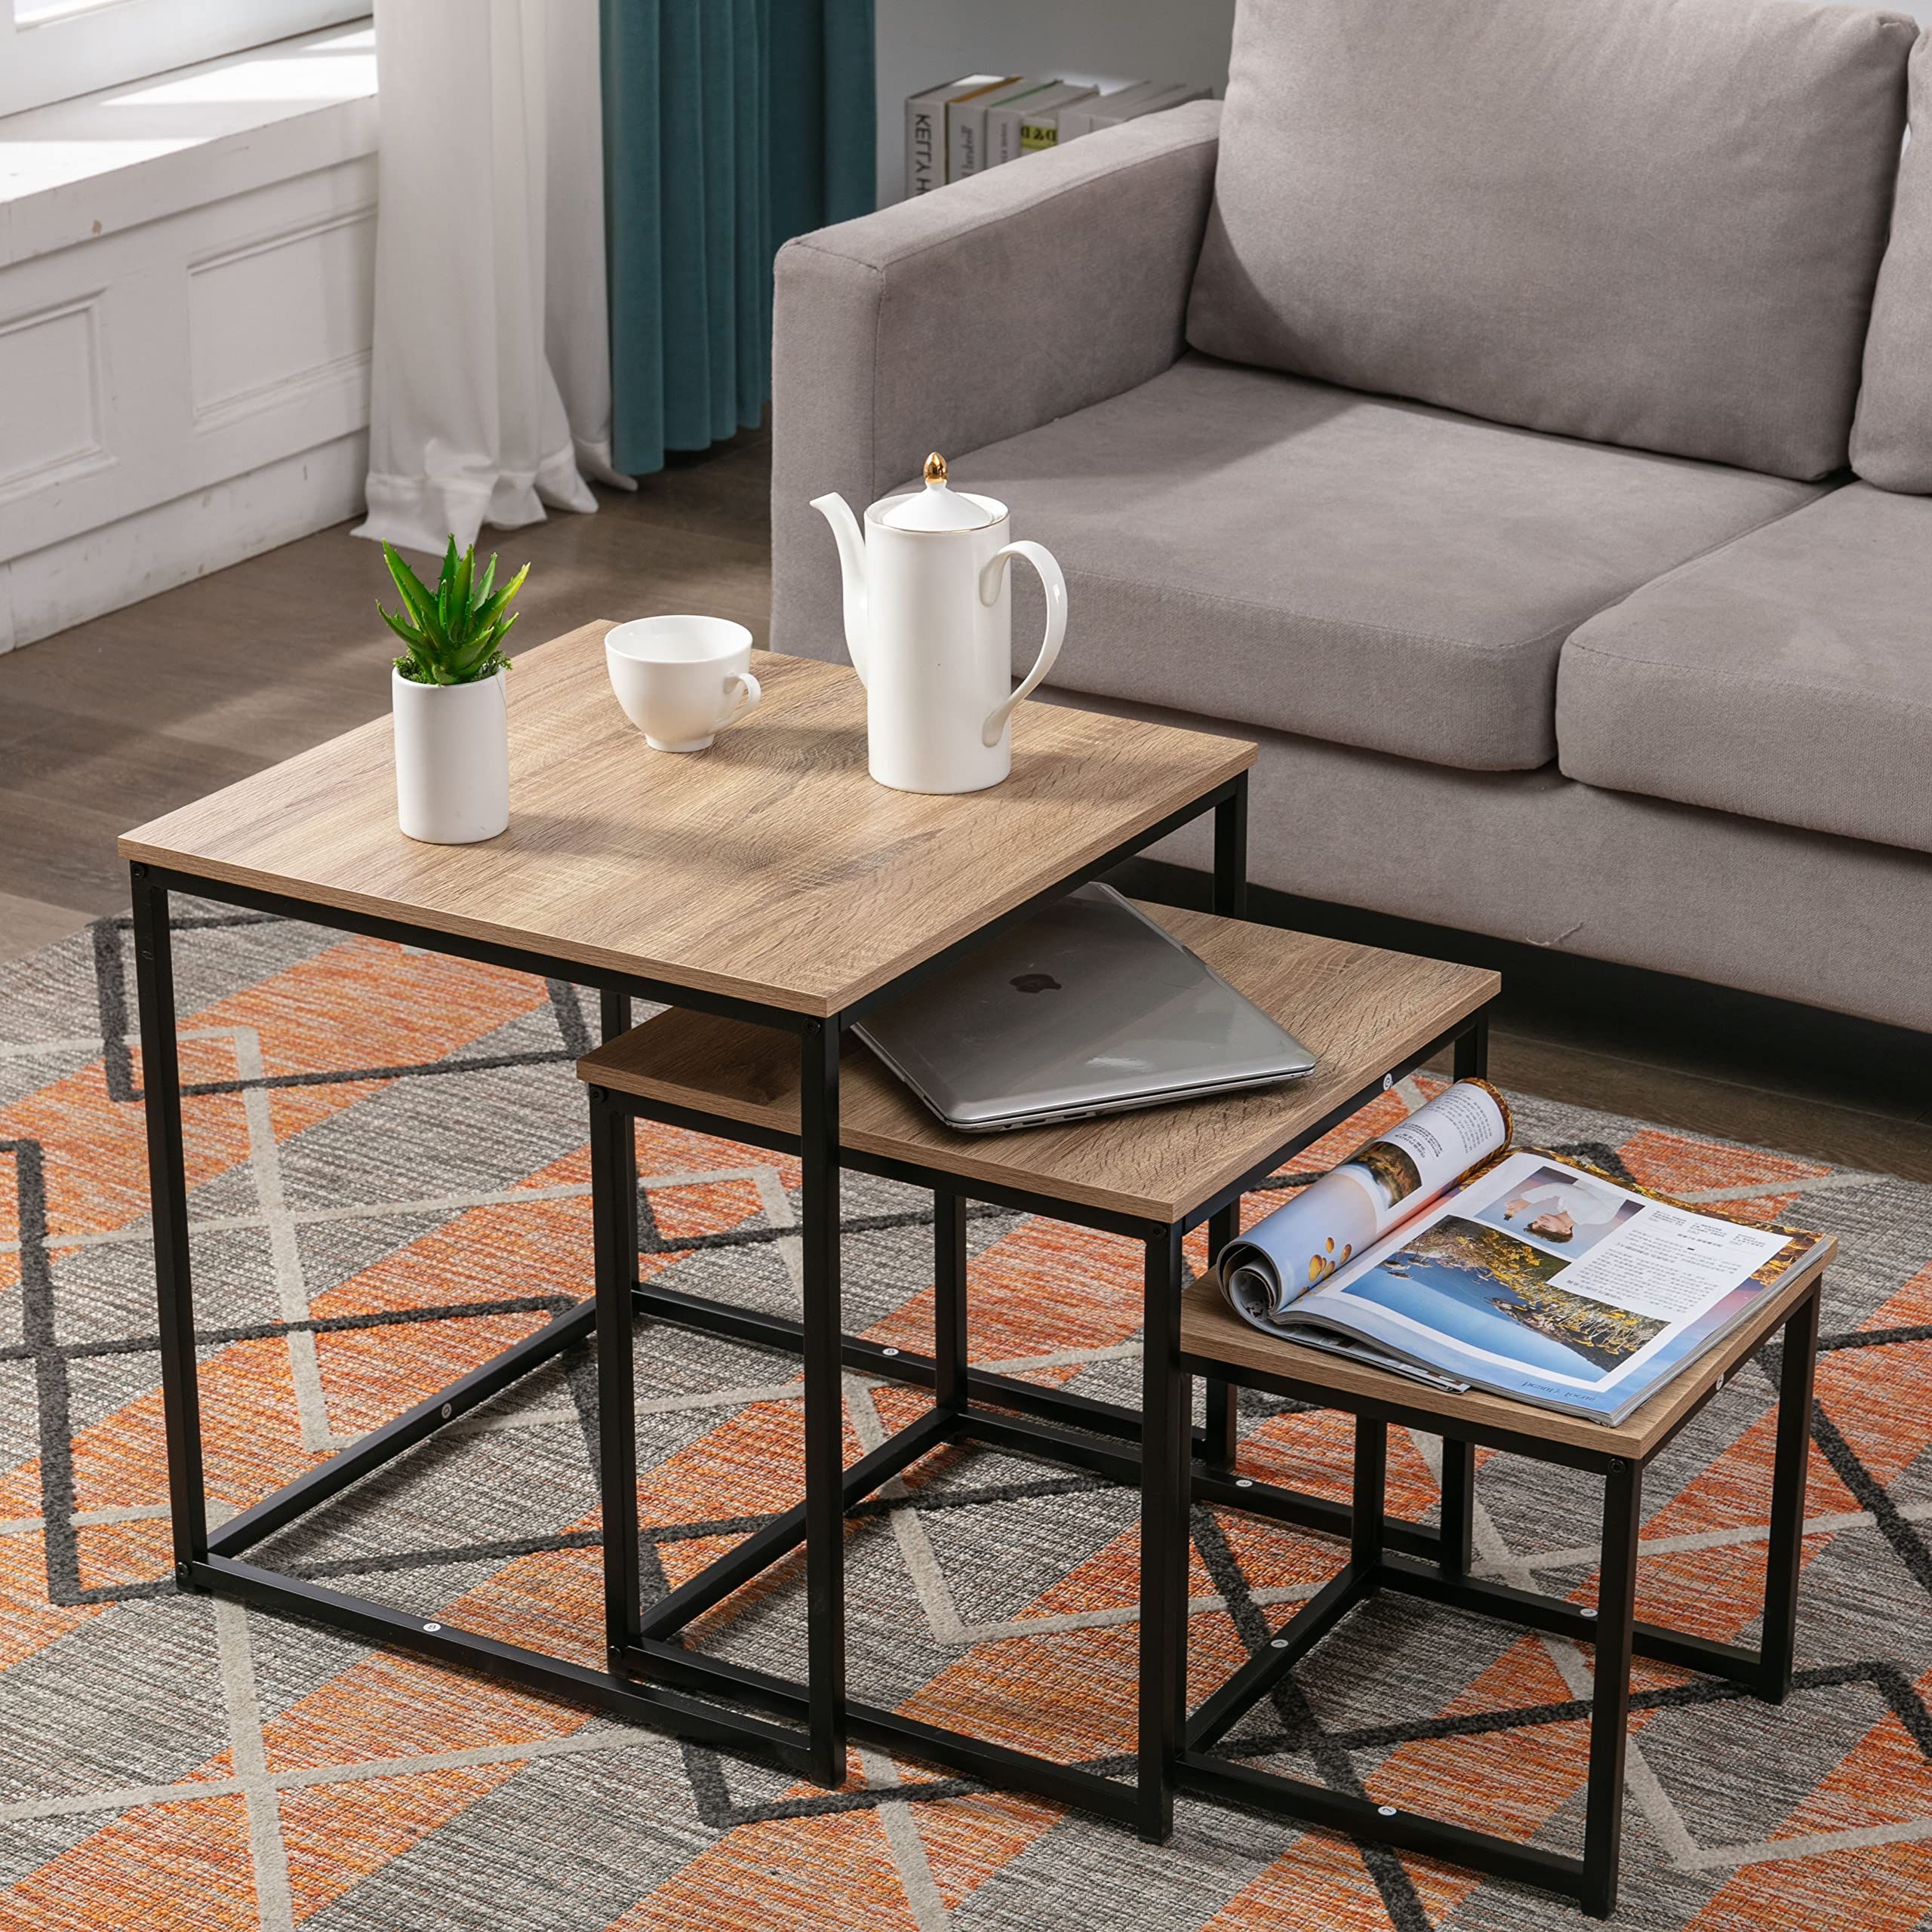 Current Mcc Direct Nest Coffee Table 3 In 1 Set Compact Modern Design For Space  Saving For Any Room (natural) : Amazon.co (View 3 of 10)